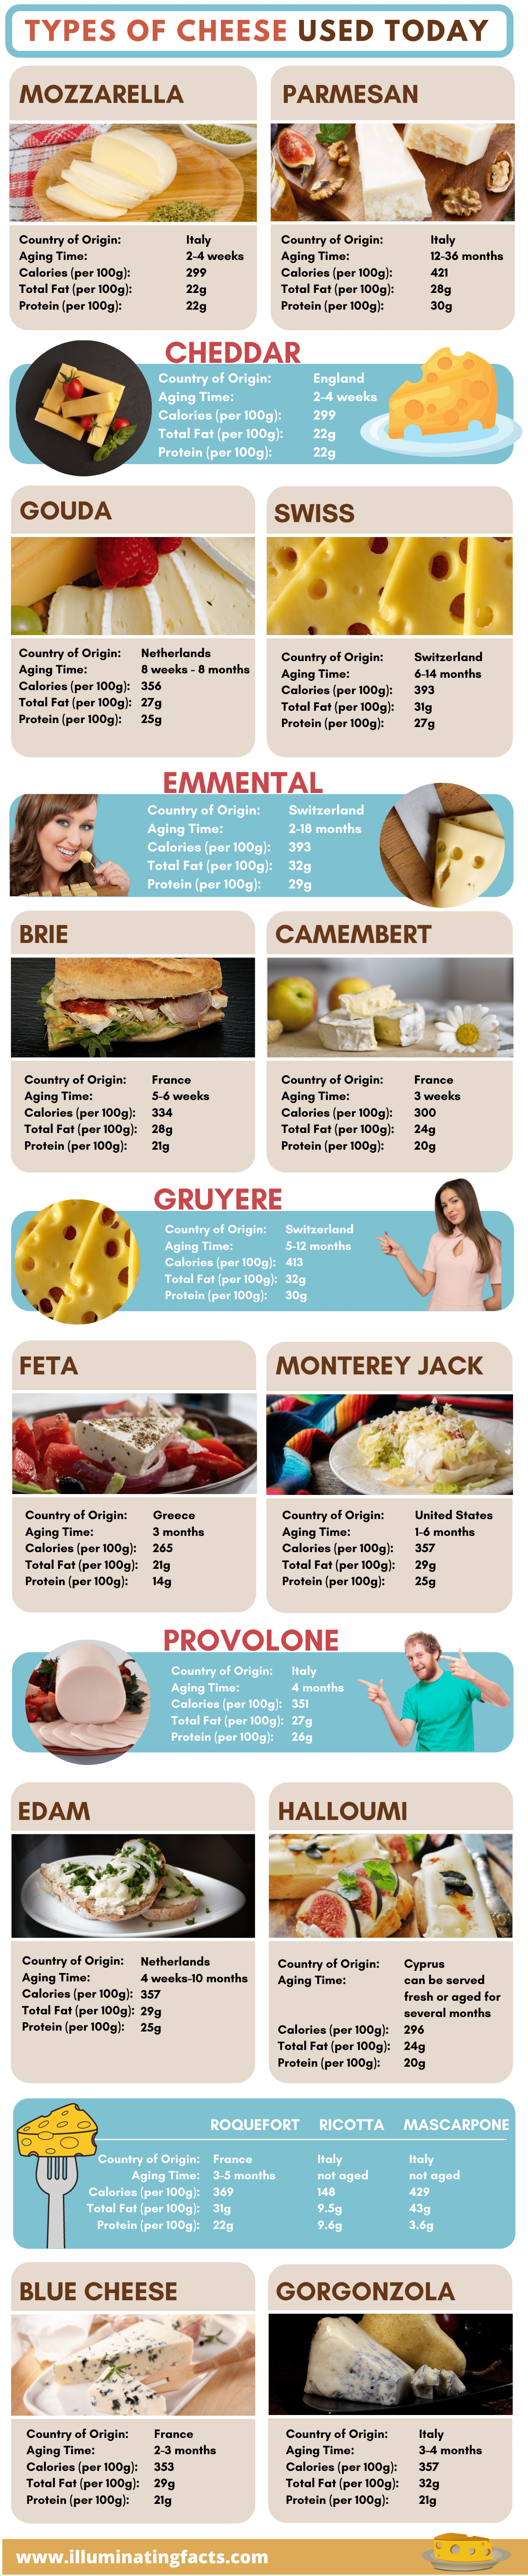 Types of Cheese Used Today